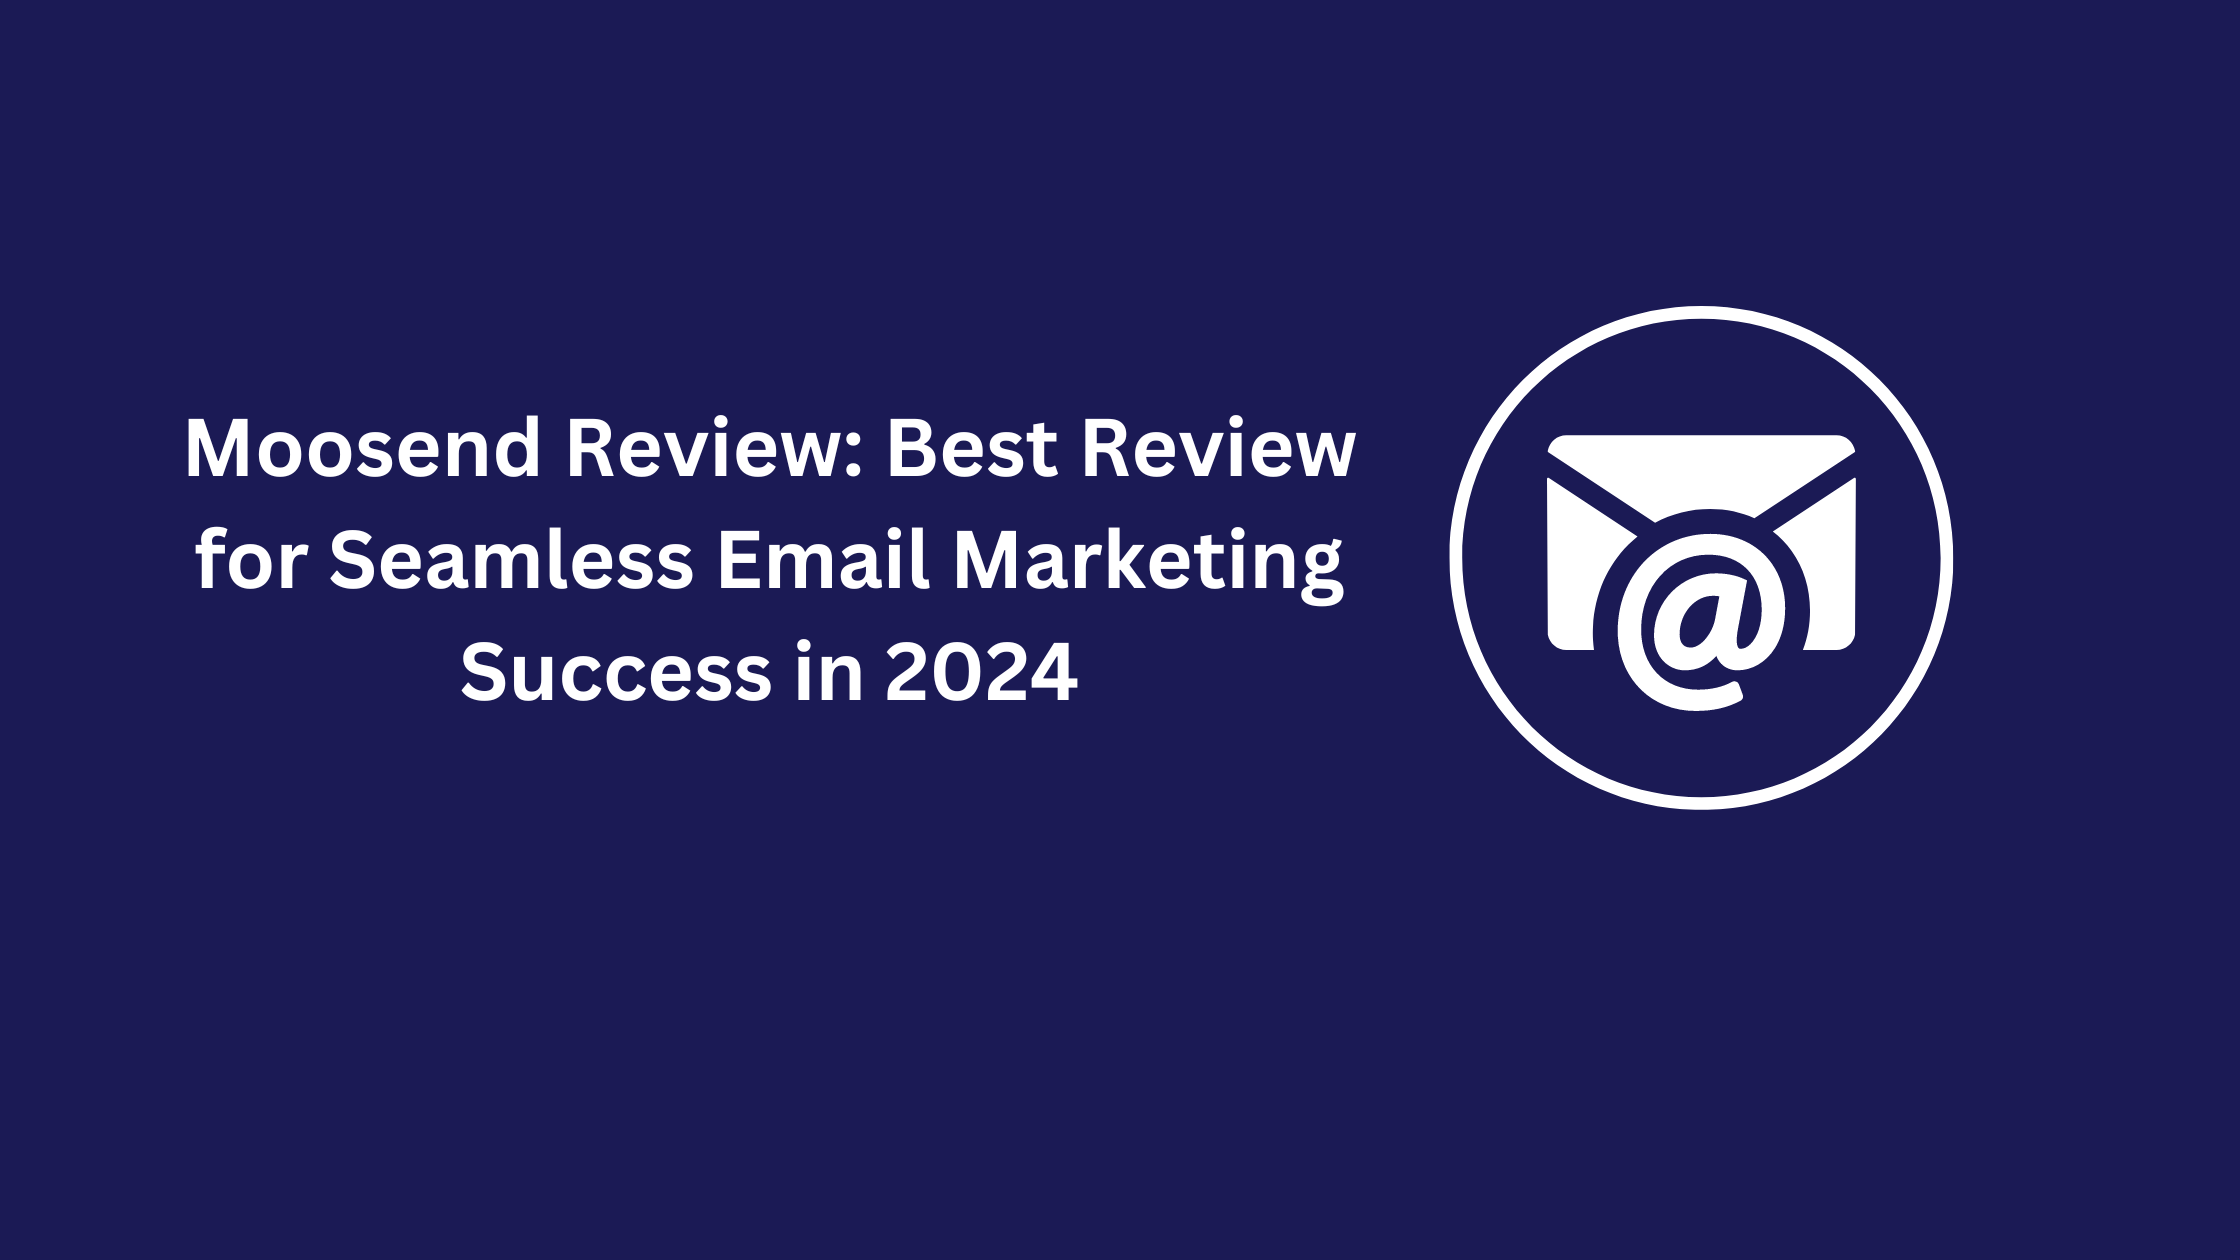 Moosend Review:  Best Review for Seamless Email Marketing Success in 2024